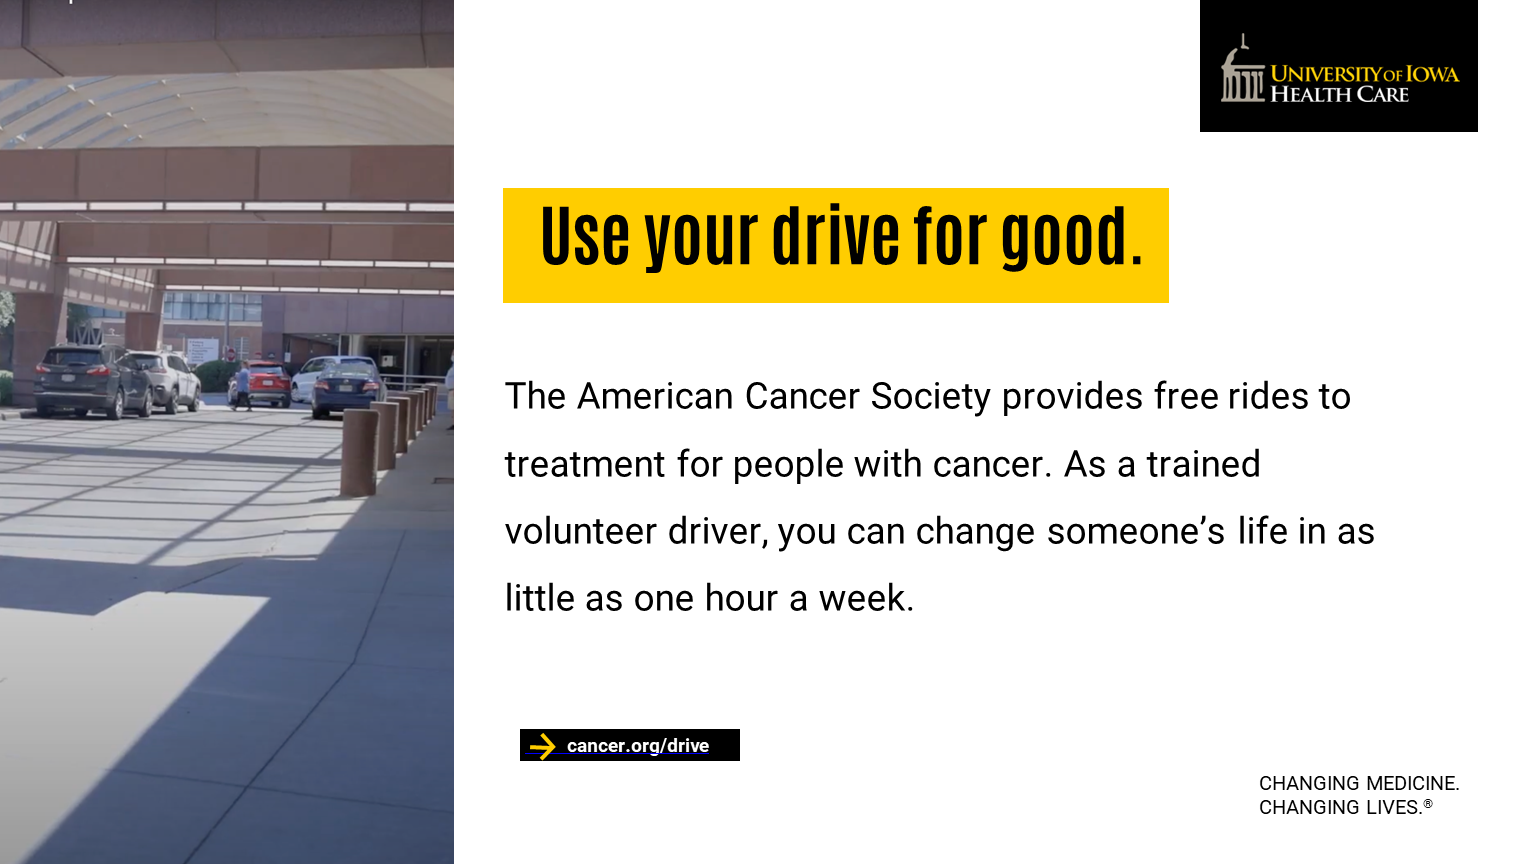 Use your drive for good. The American Cancer Society provides free rides to treatment for people with cancer. 